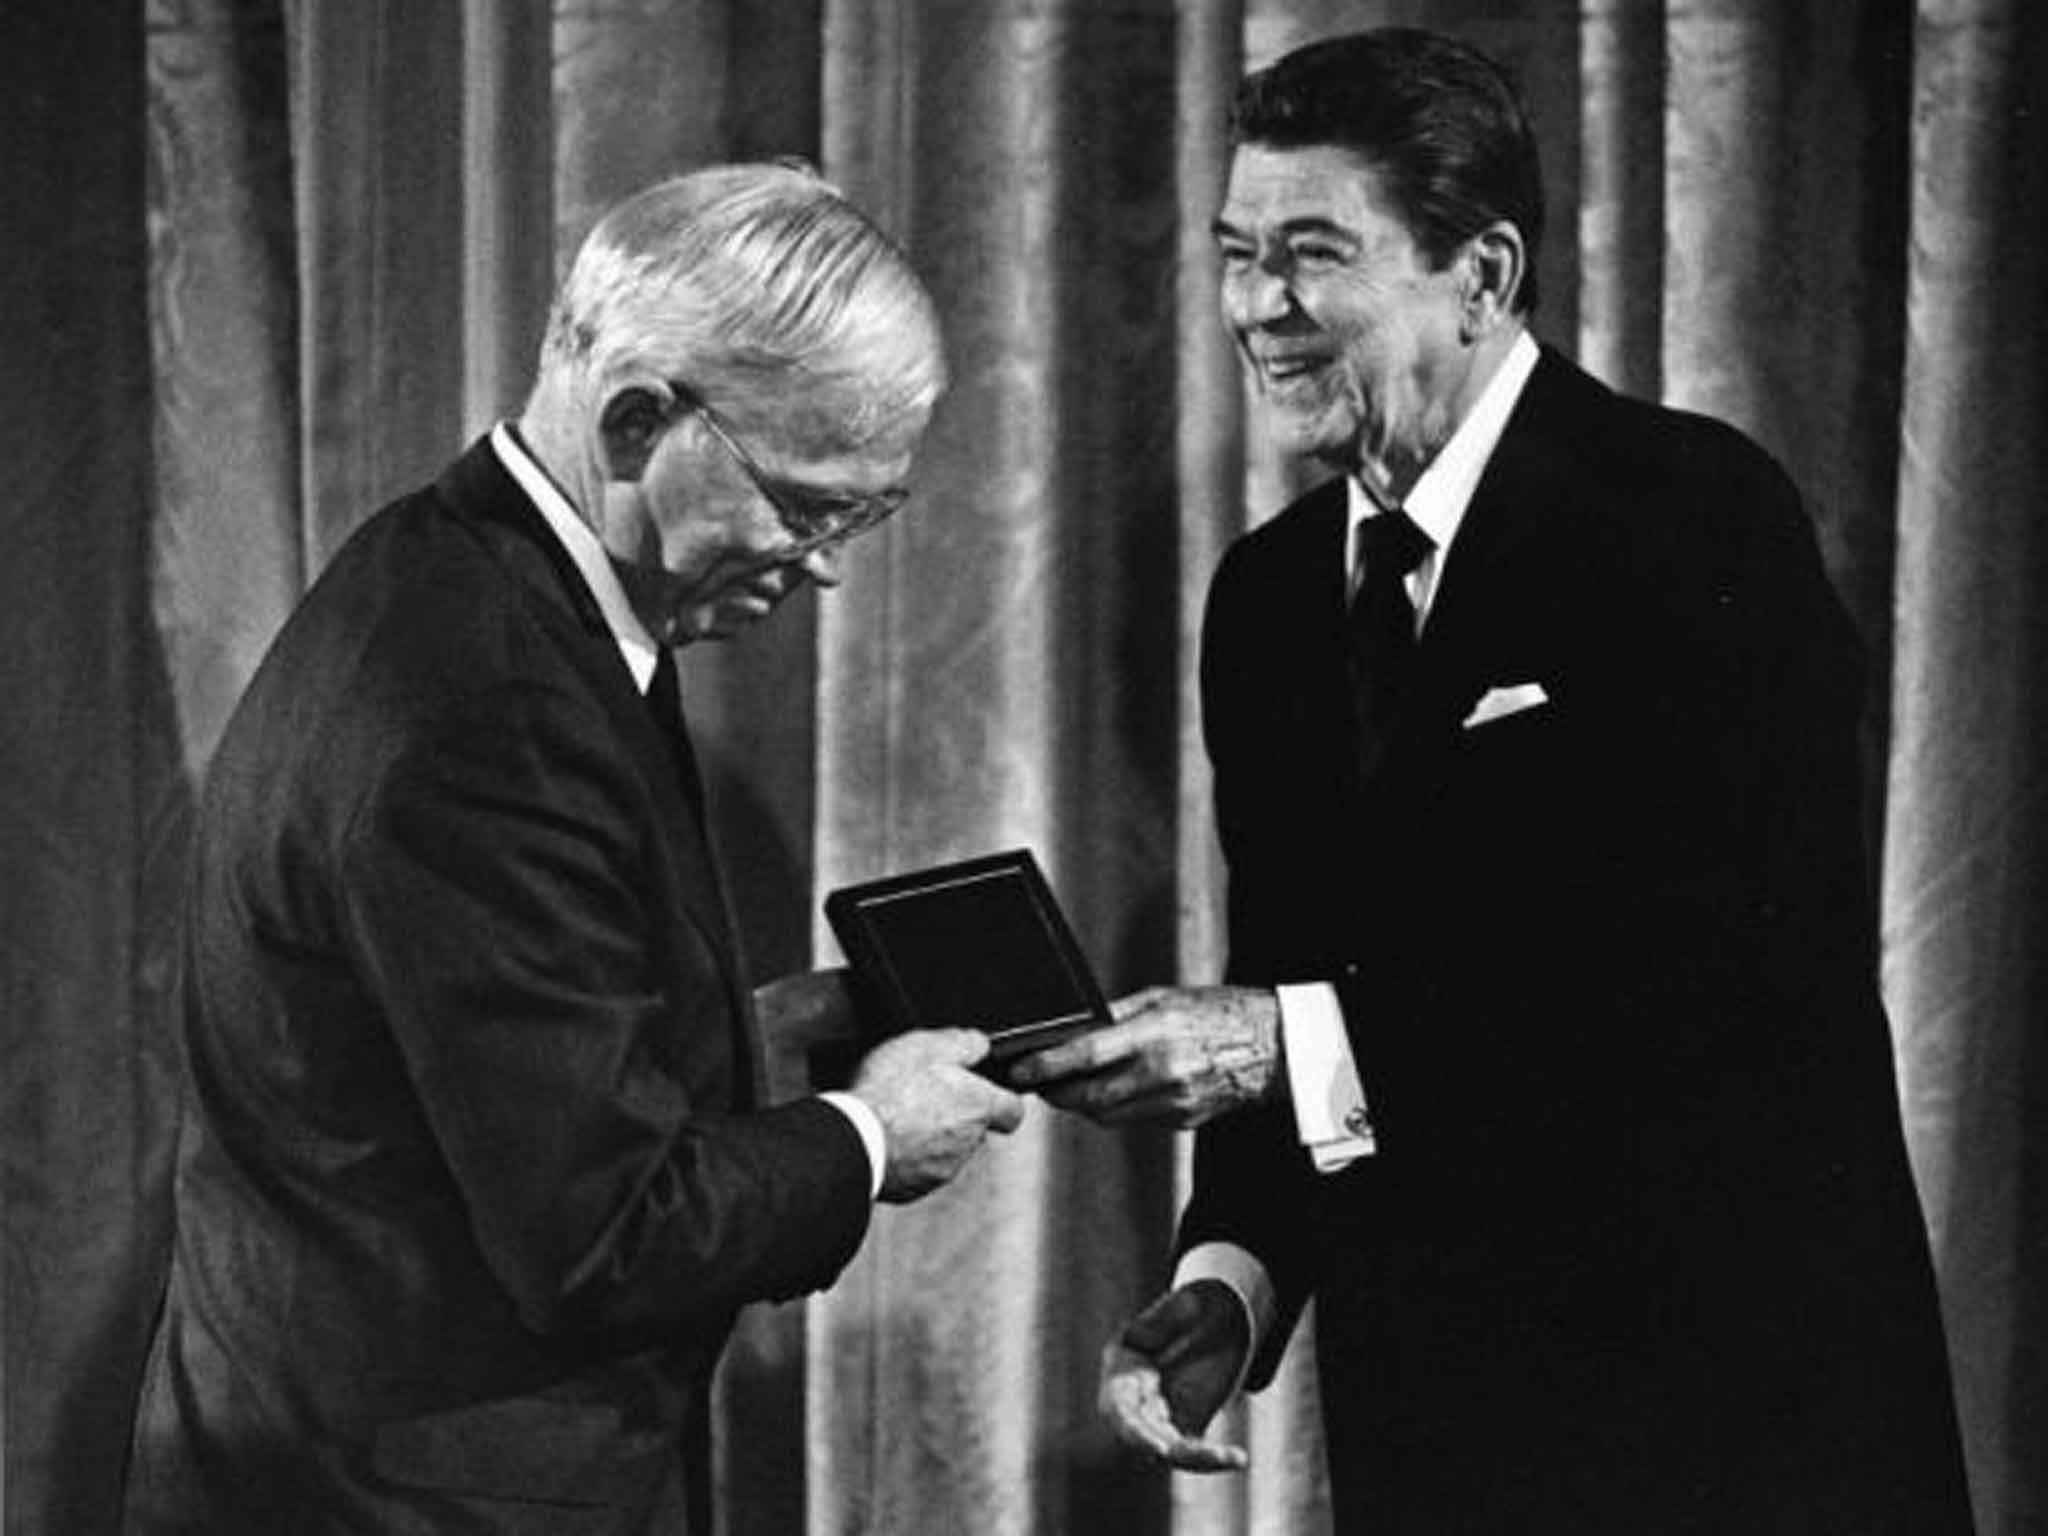 Mountcastle receives the US National Medal of Science from President Reagan in 1986